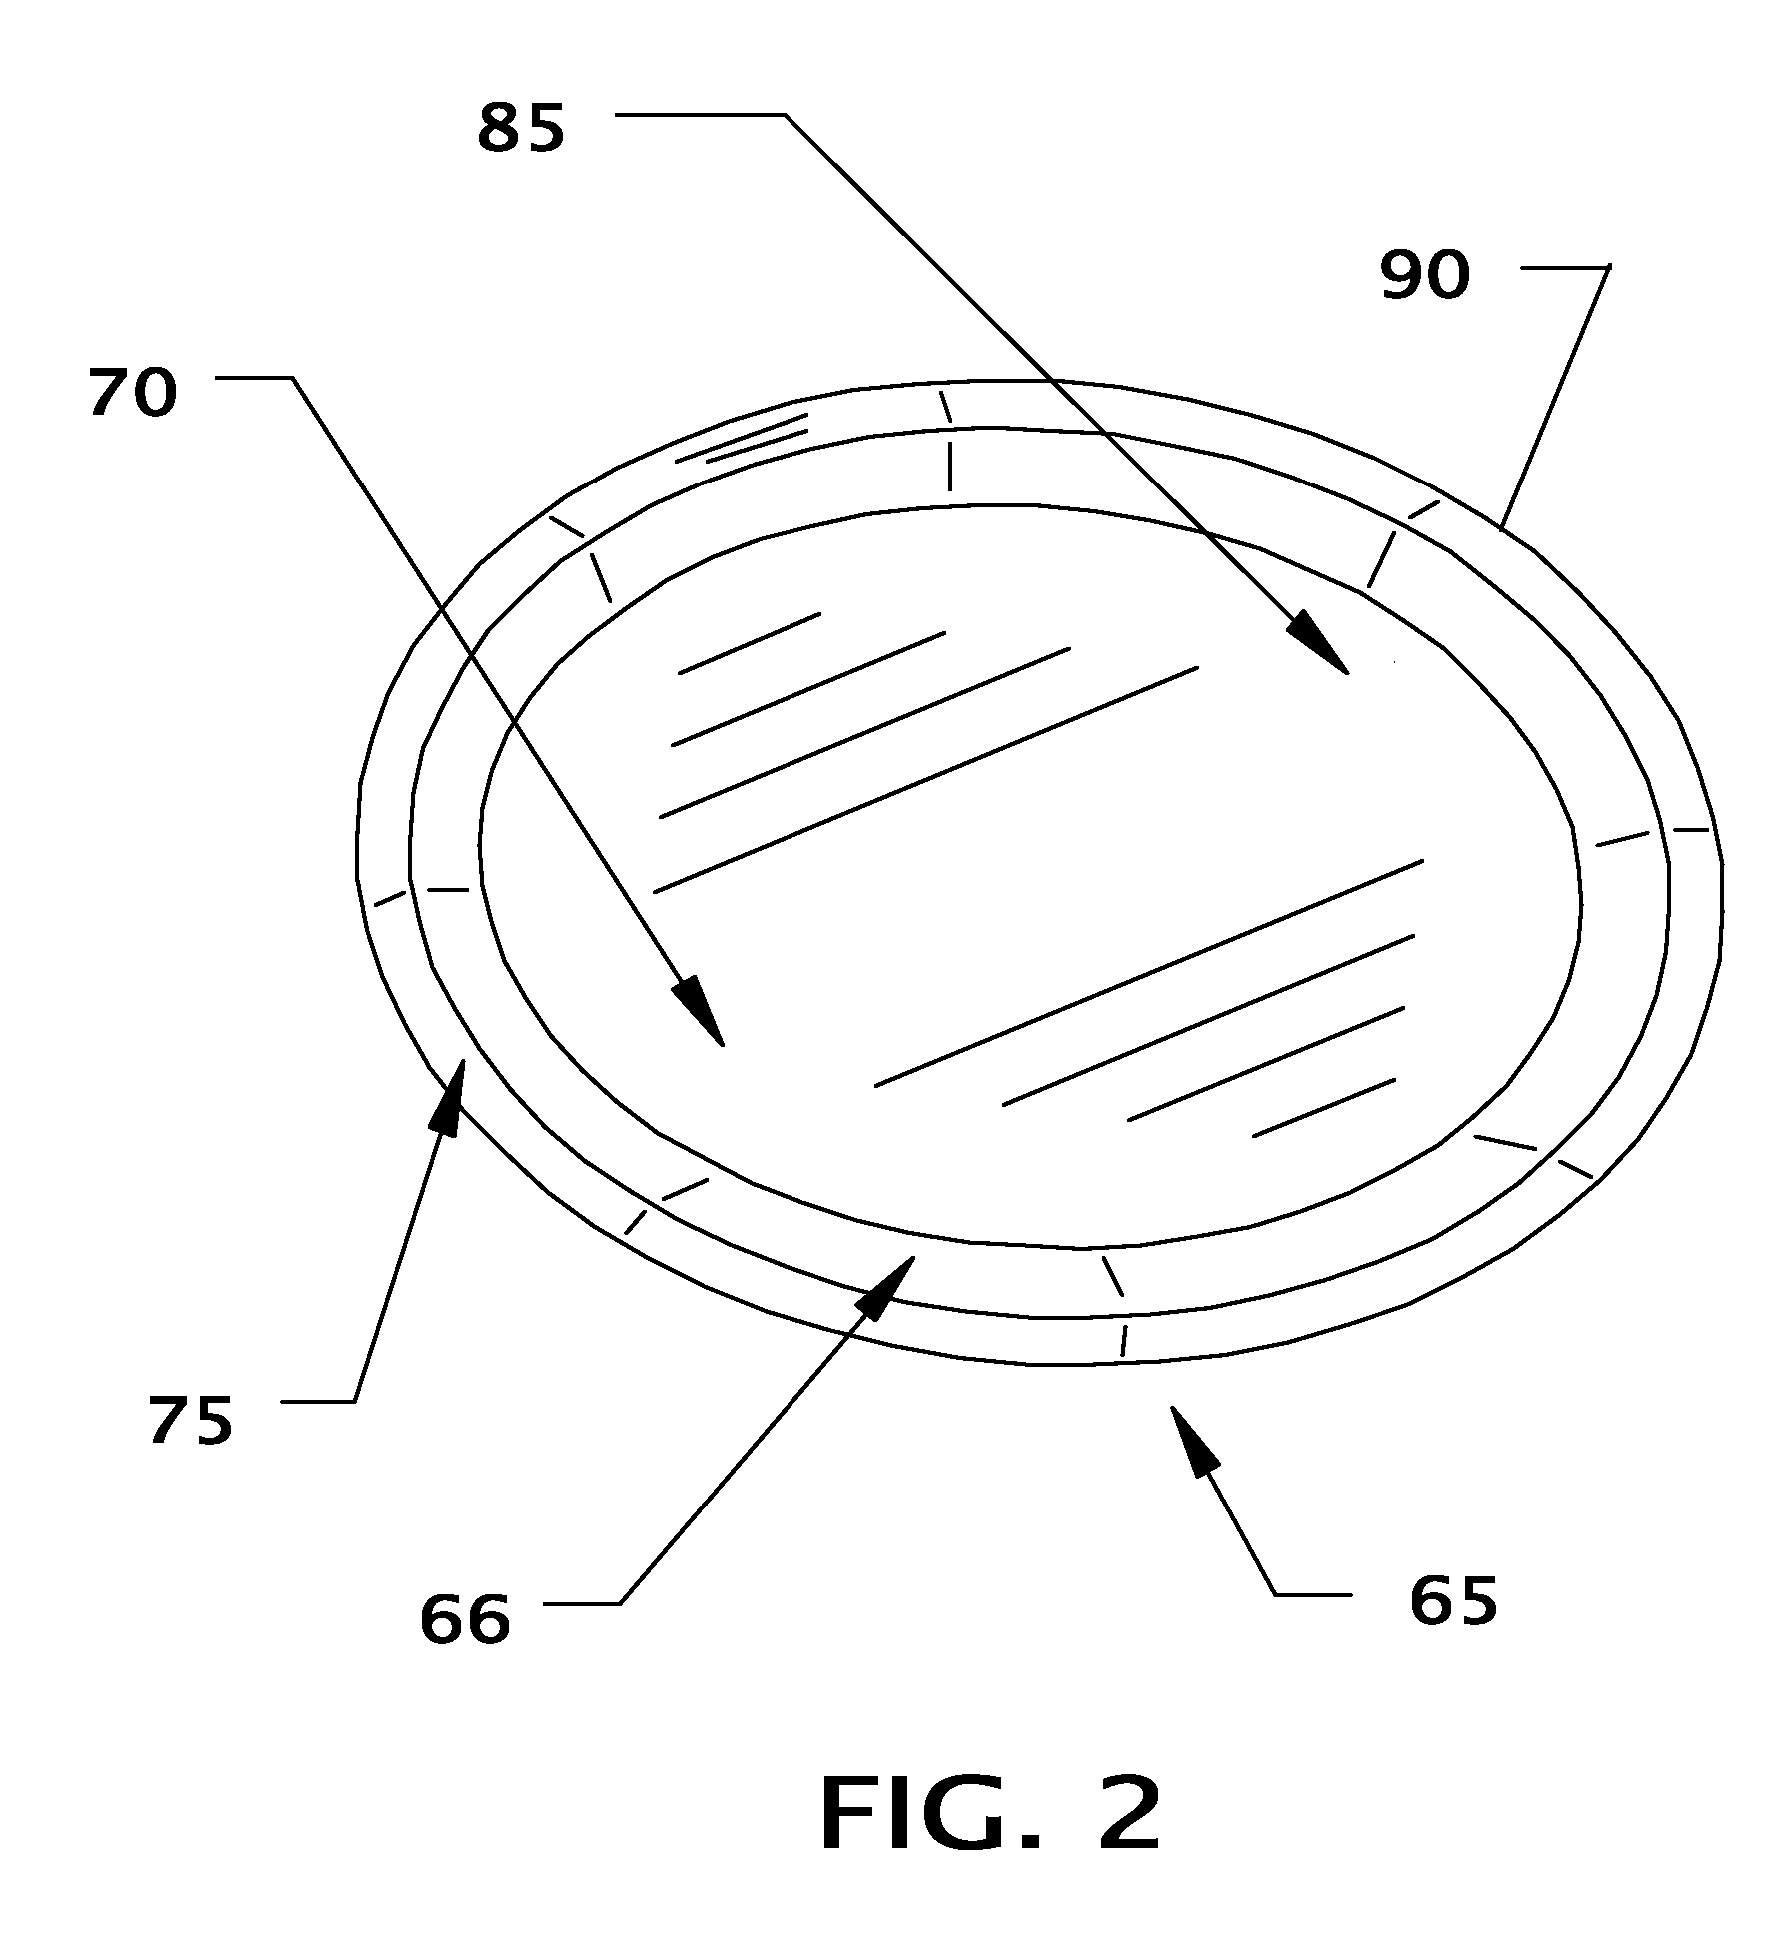 Method of making and using a kitchen receptacle for the collection and transfer of food material